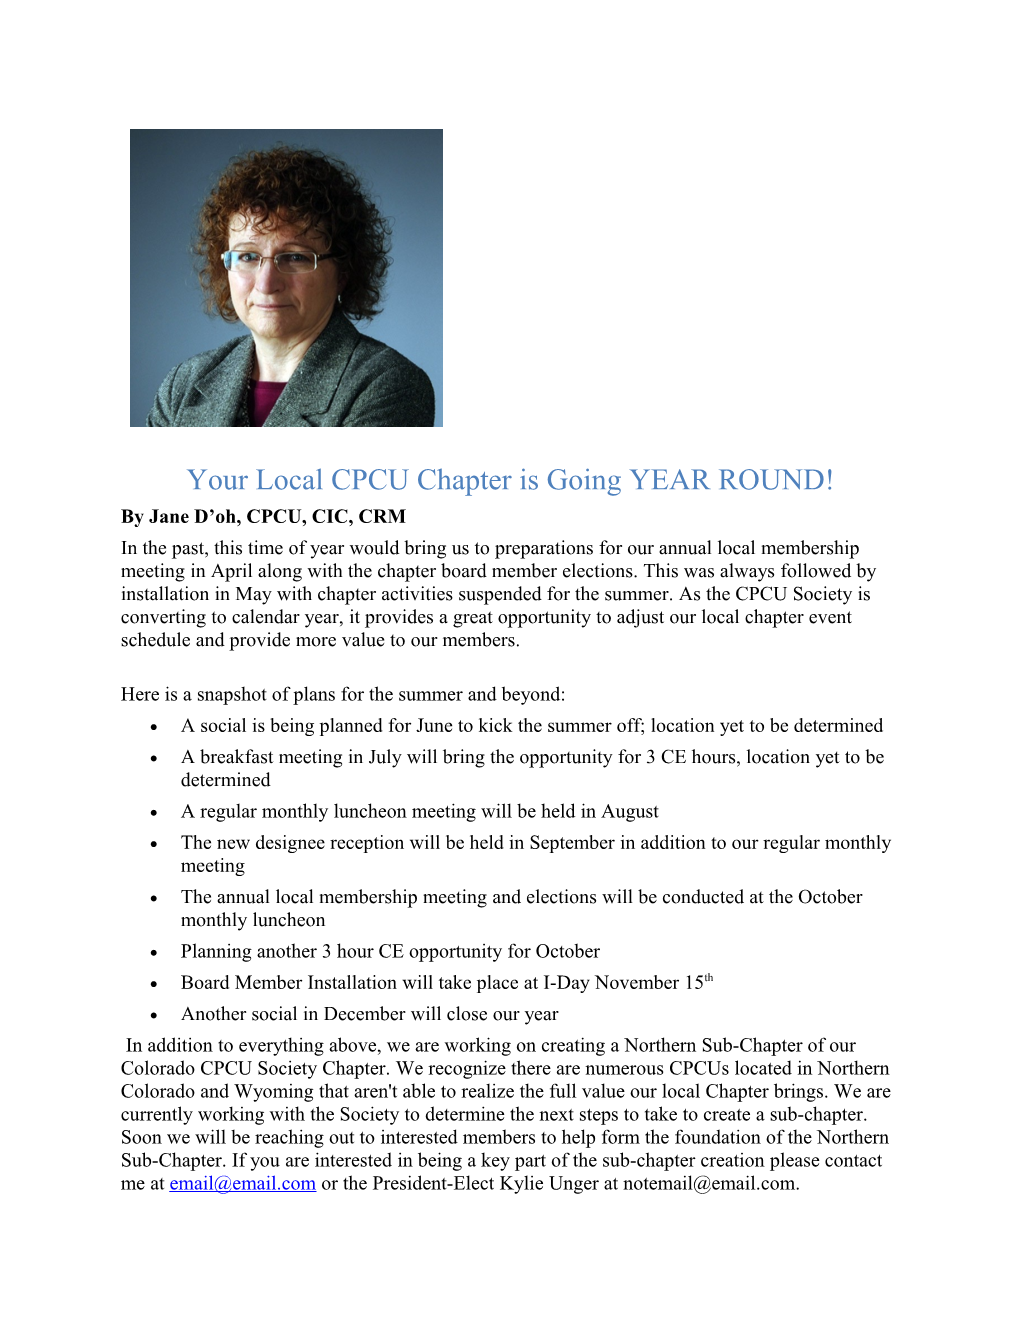 Your Local CPCU Chapter Is Going YEAR ROUND!